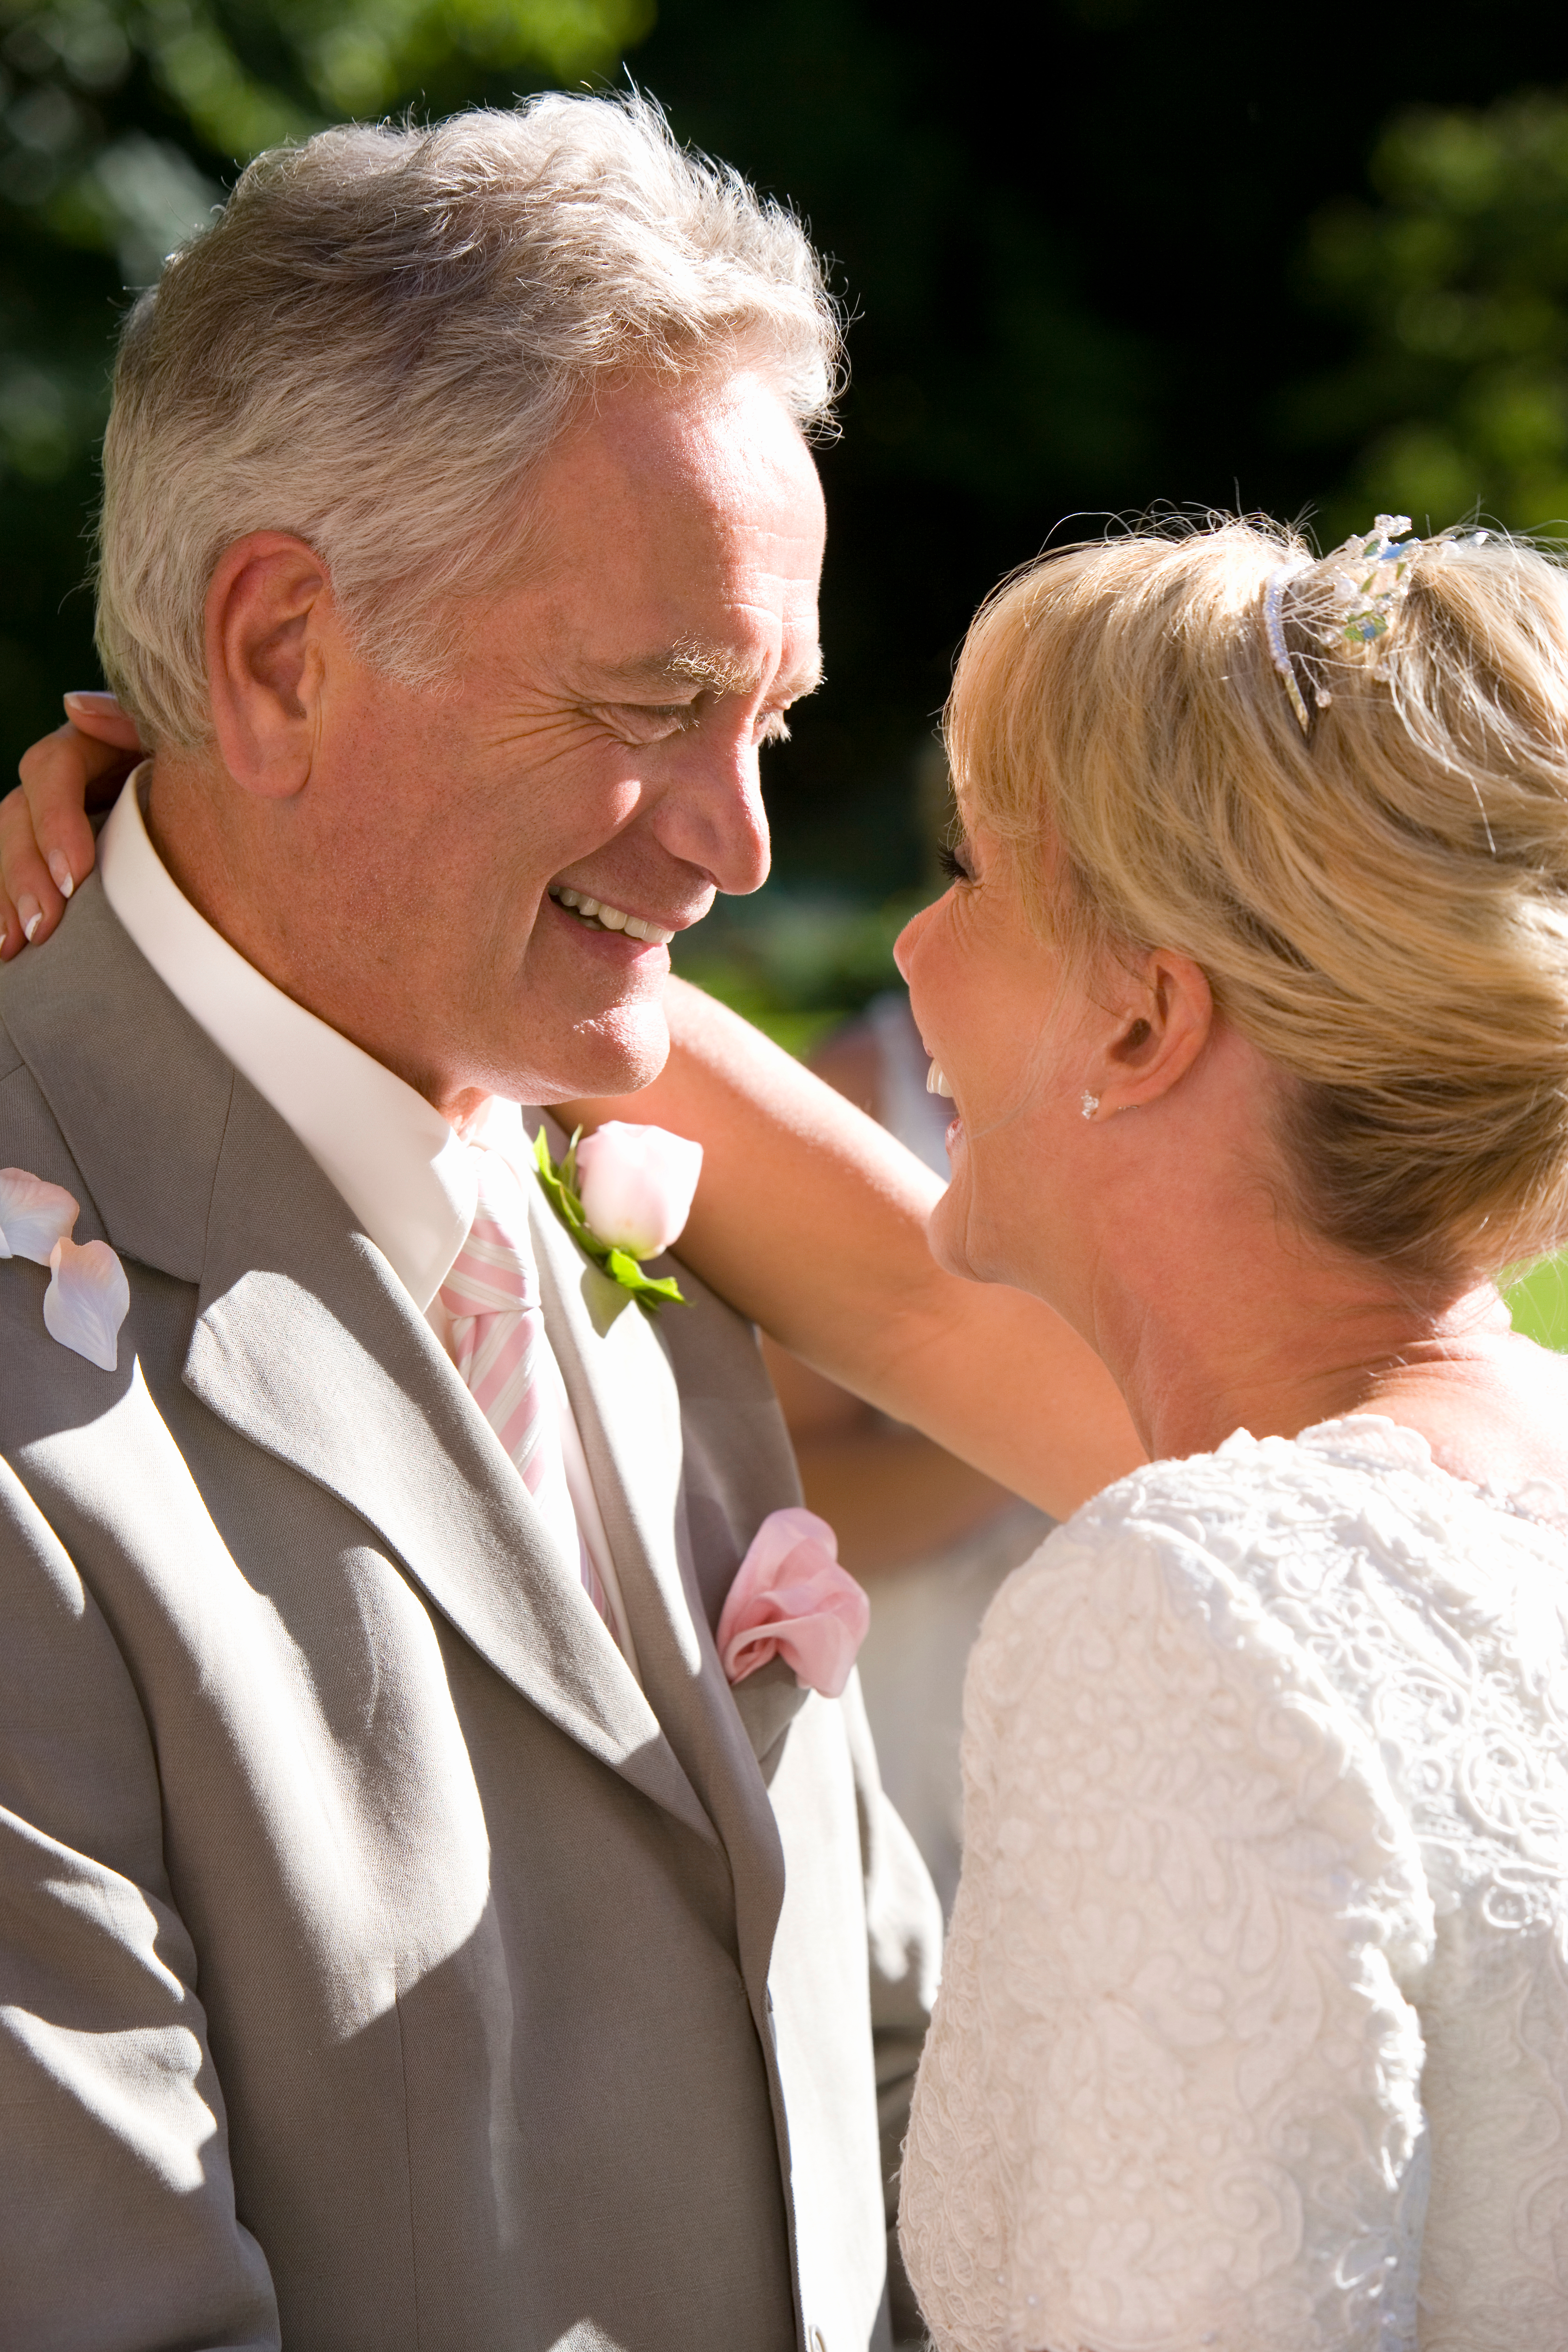 A loving senior couple hugging during a wedding | Source: Shutterstock